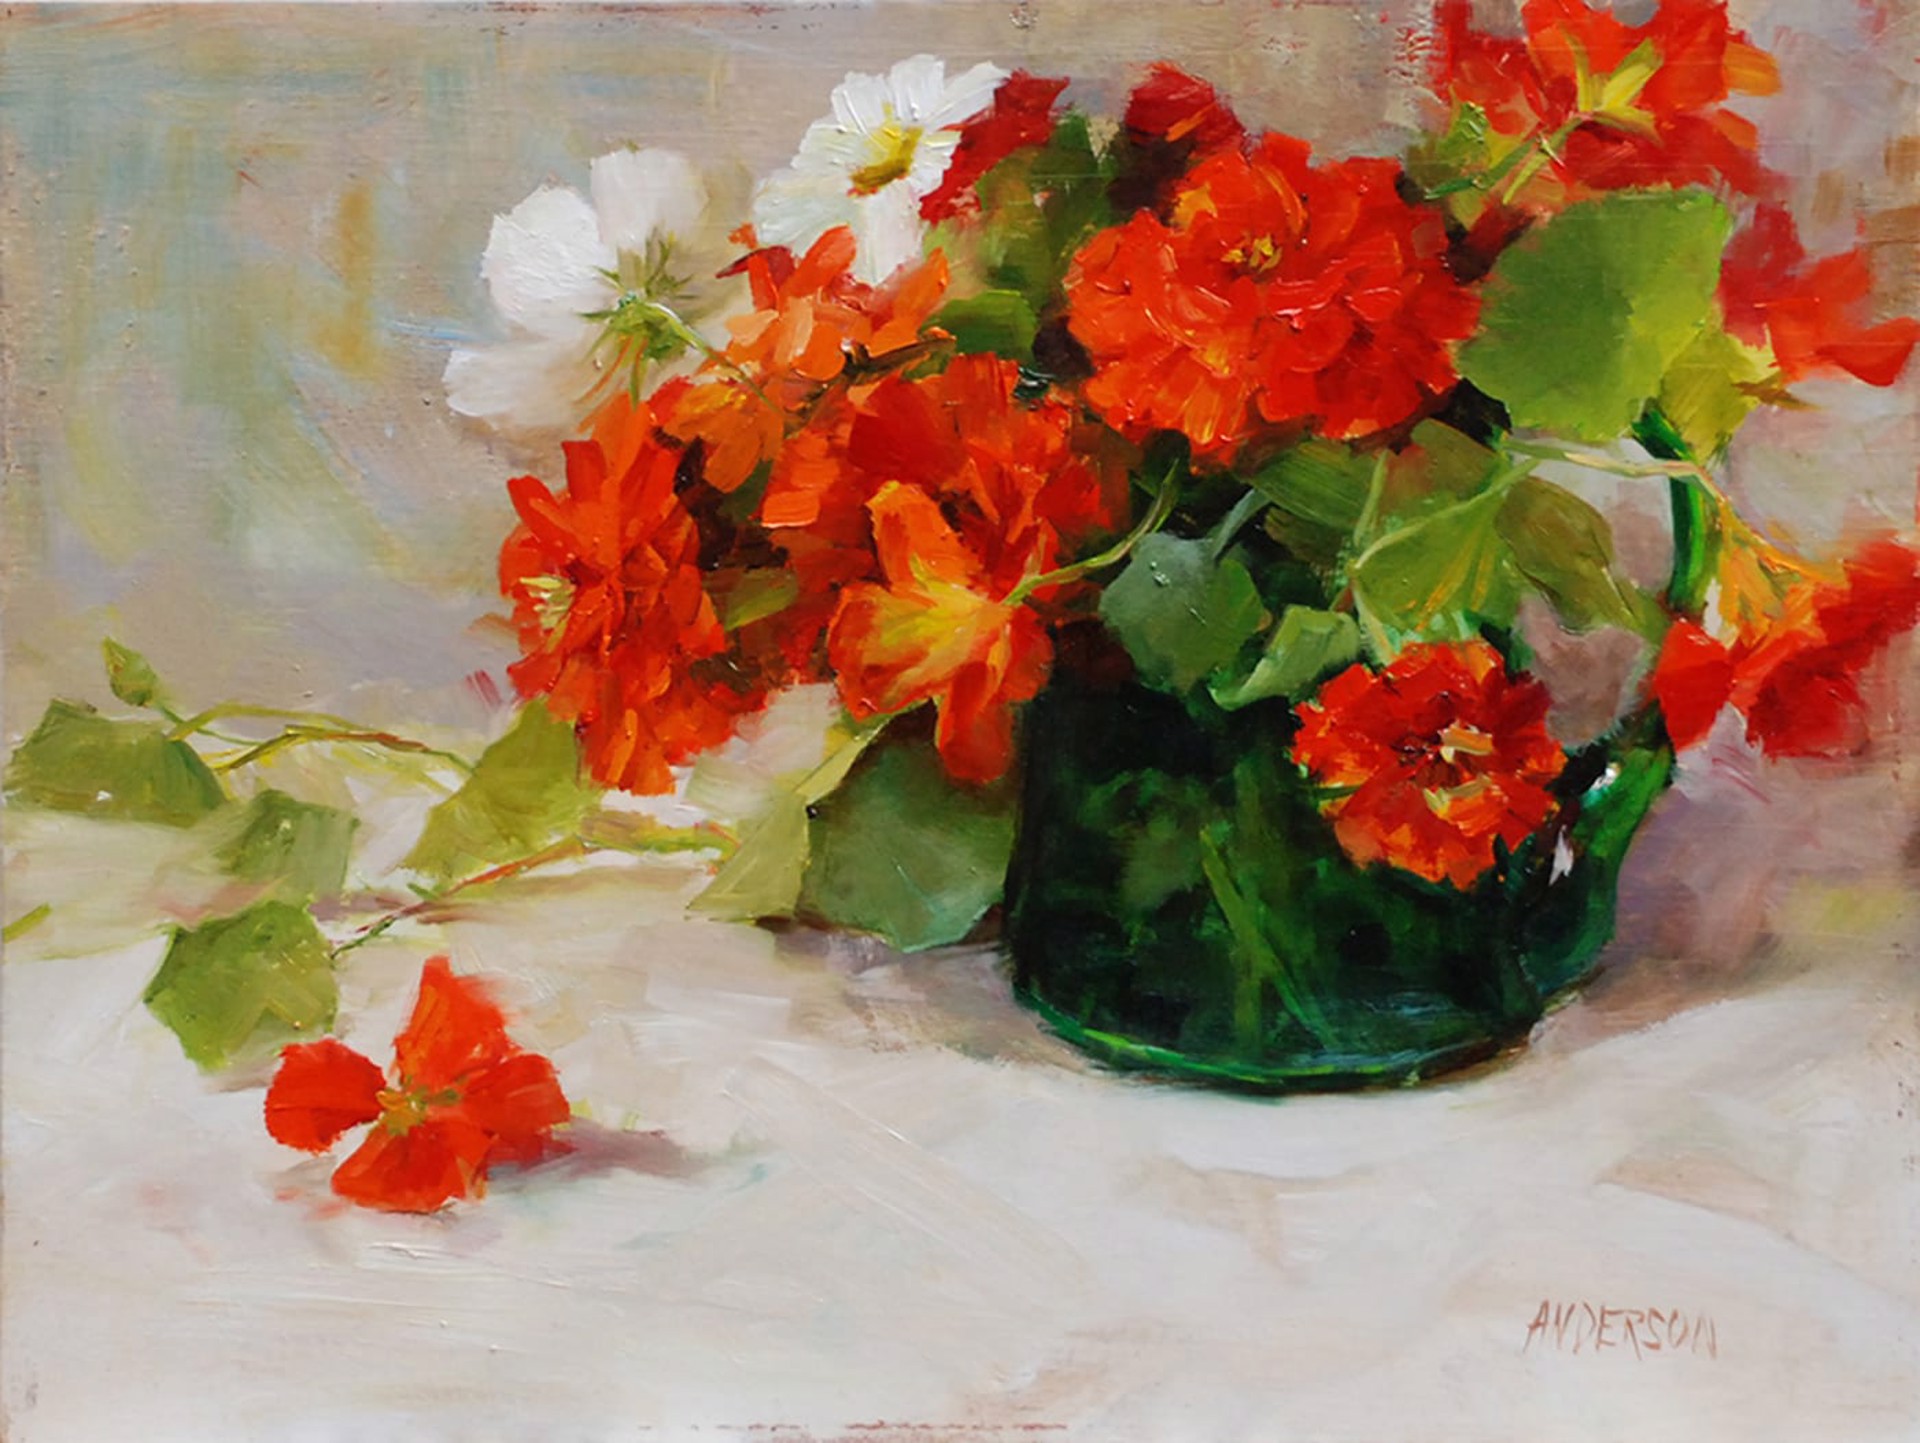 Summer Red Zinnias by Kathy Anderson